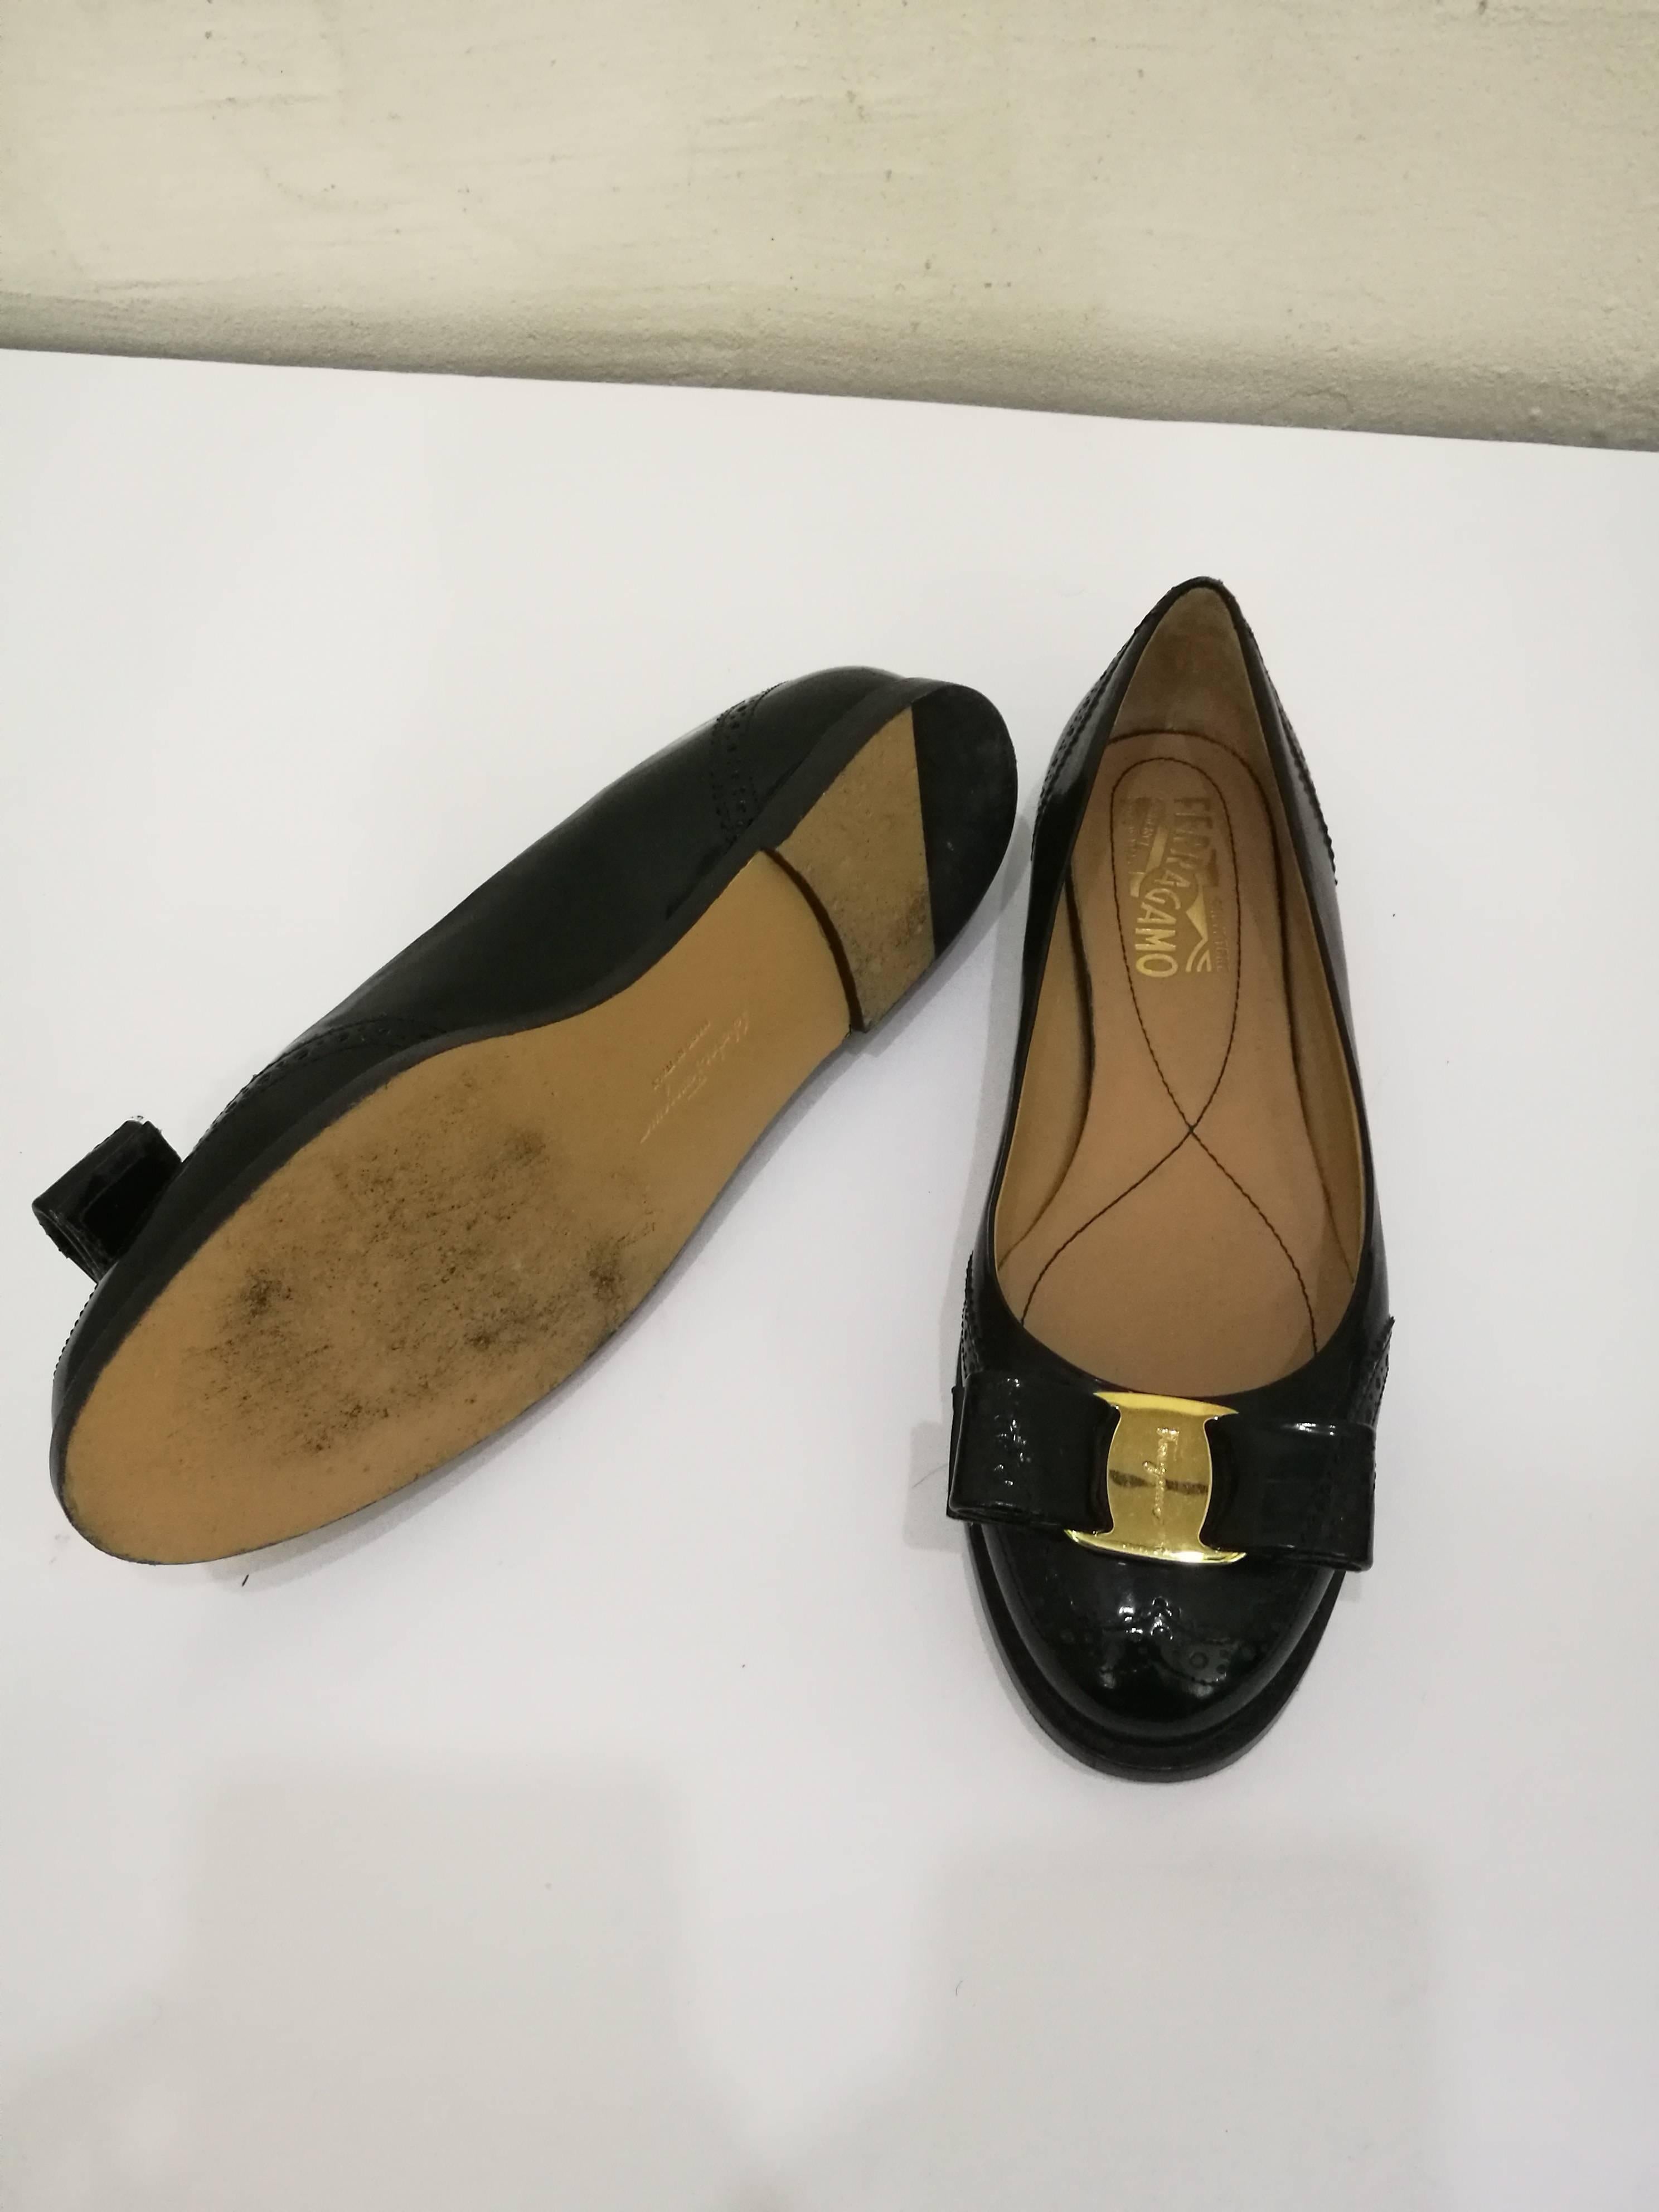 Salvatore Ferragamo Black Ballerinas with gold tone hardware
Totally made in italy in size 36